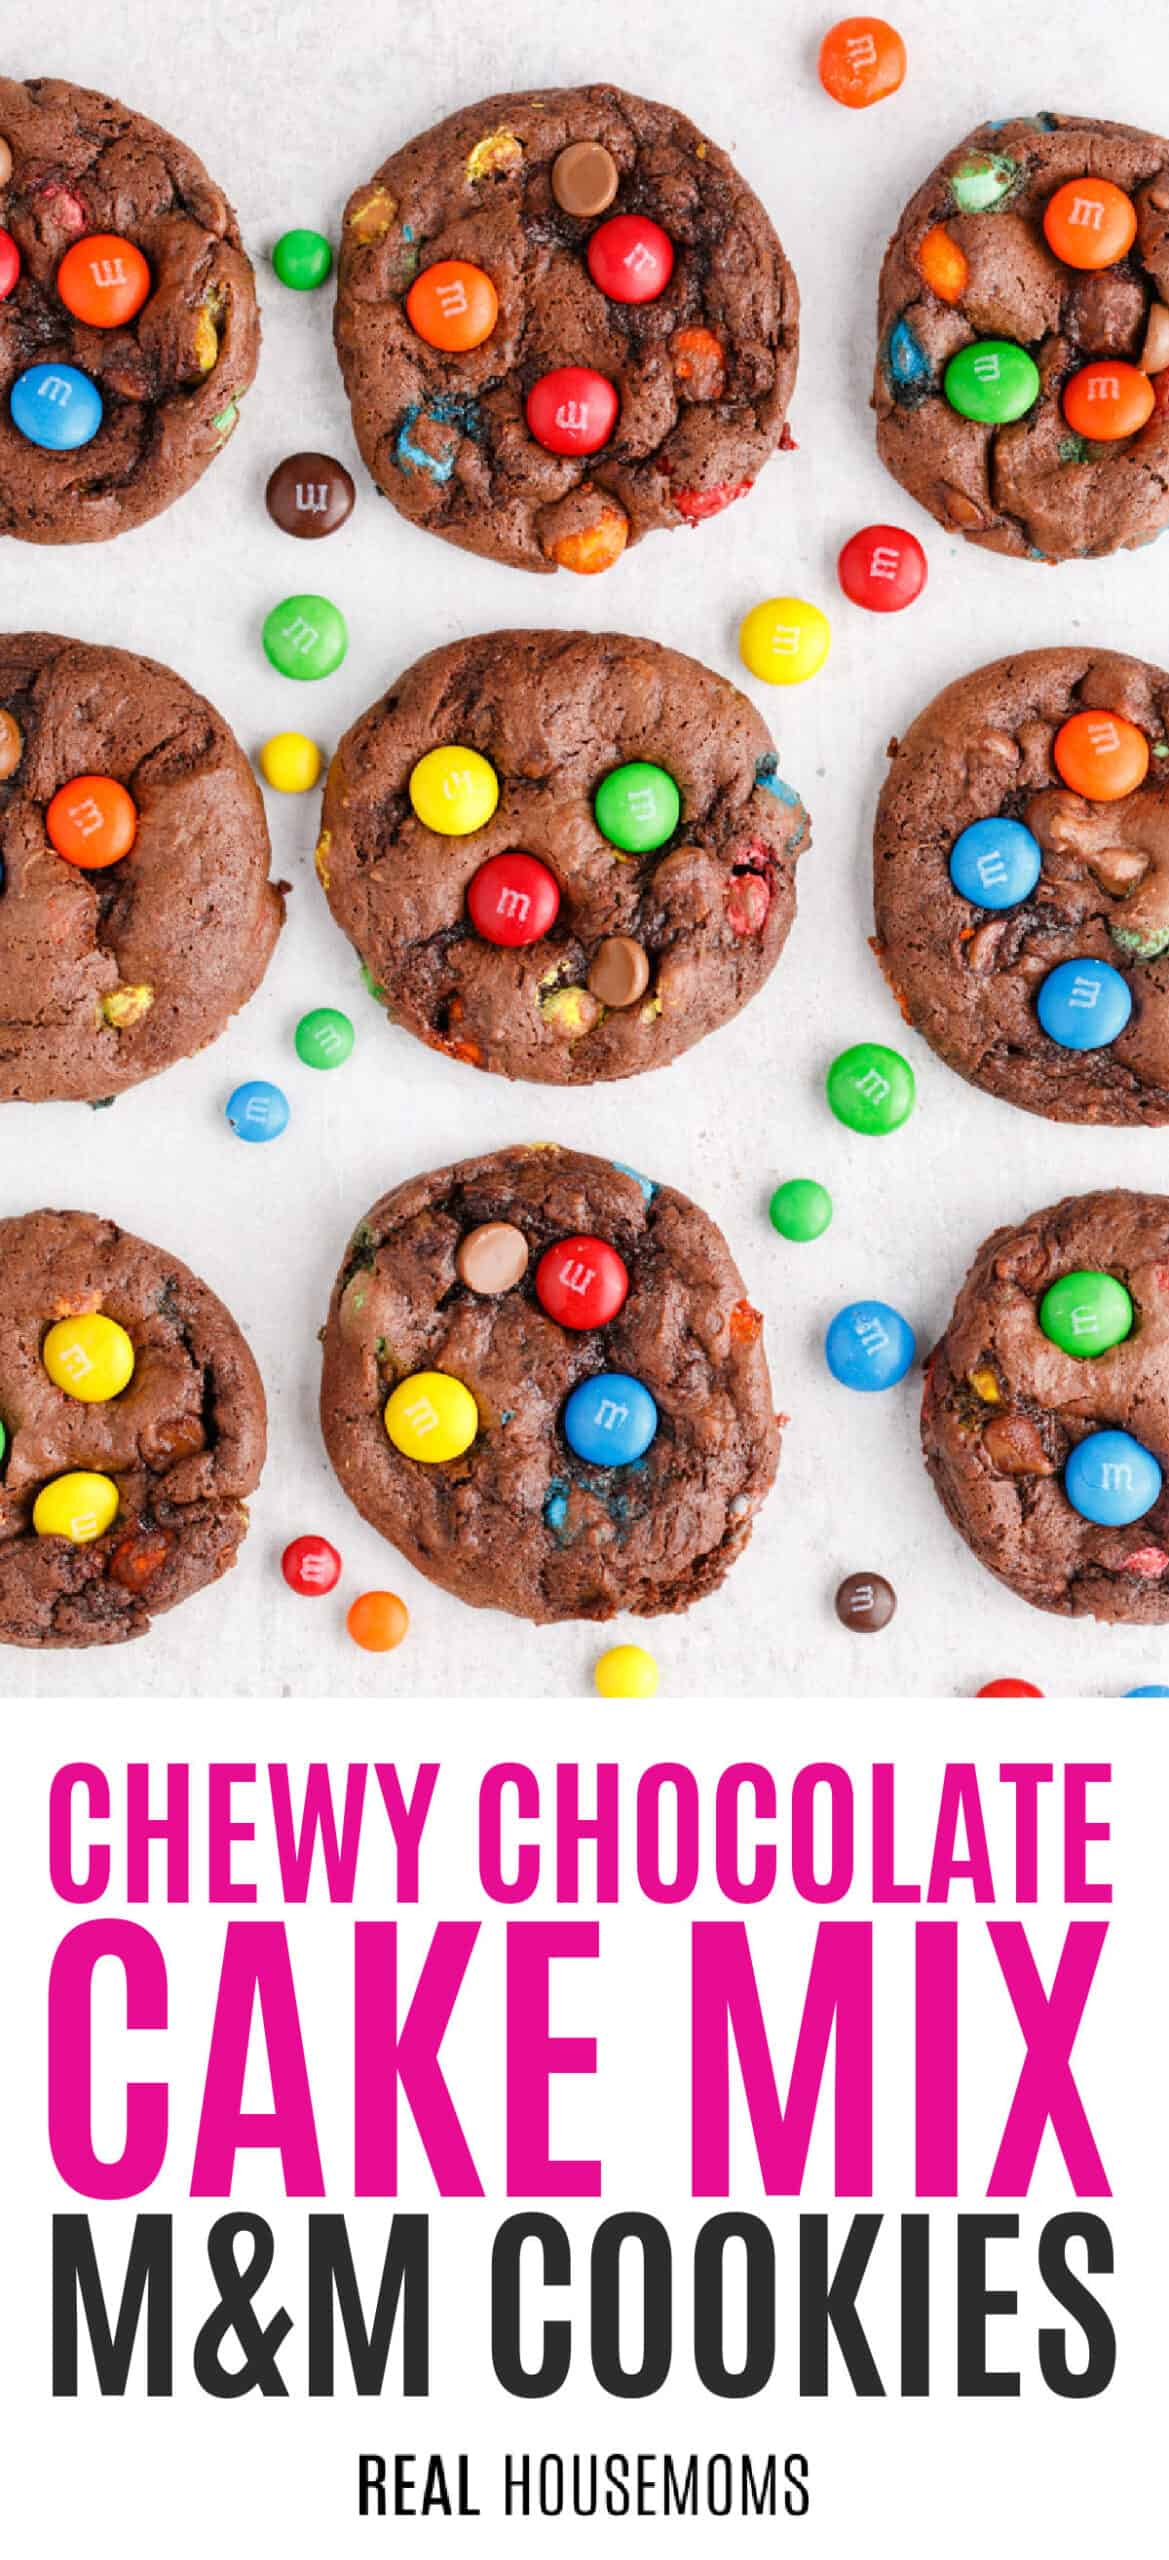 Chewy Chocolate Cake Mix M&M Cookies ⋆ Real Housemoms